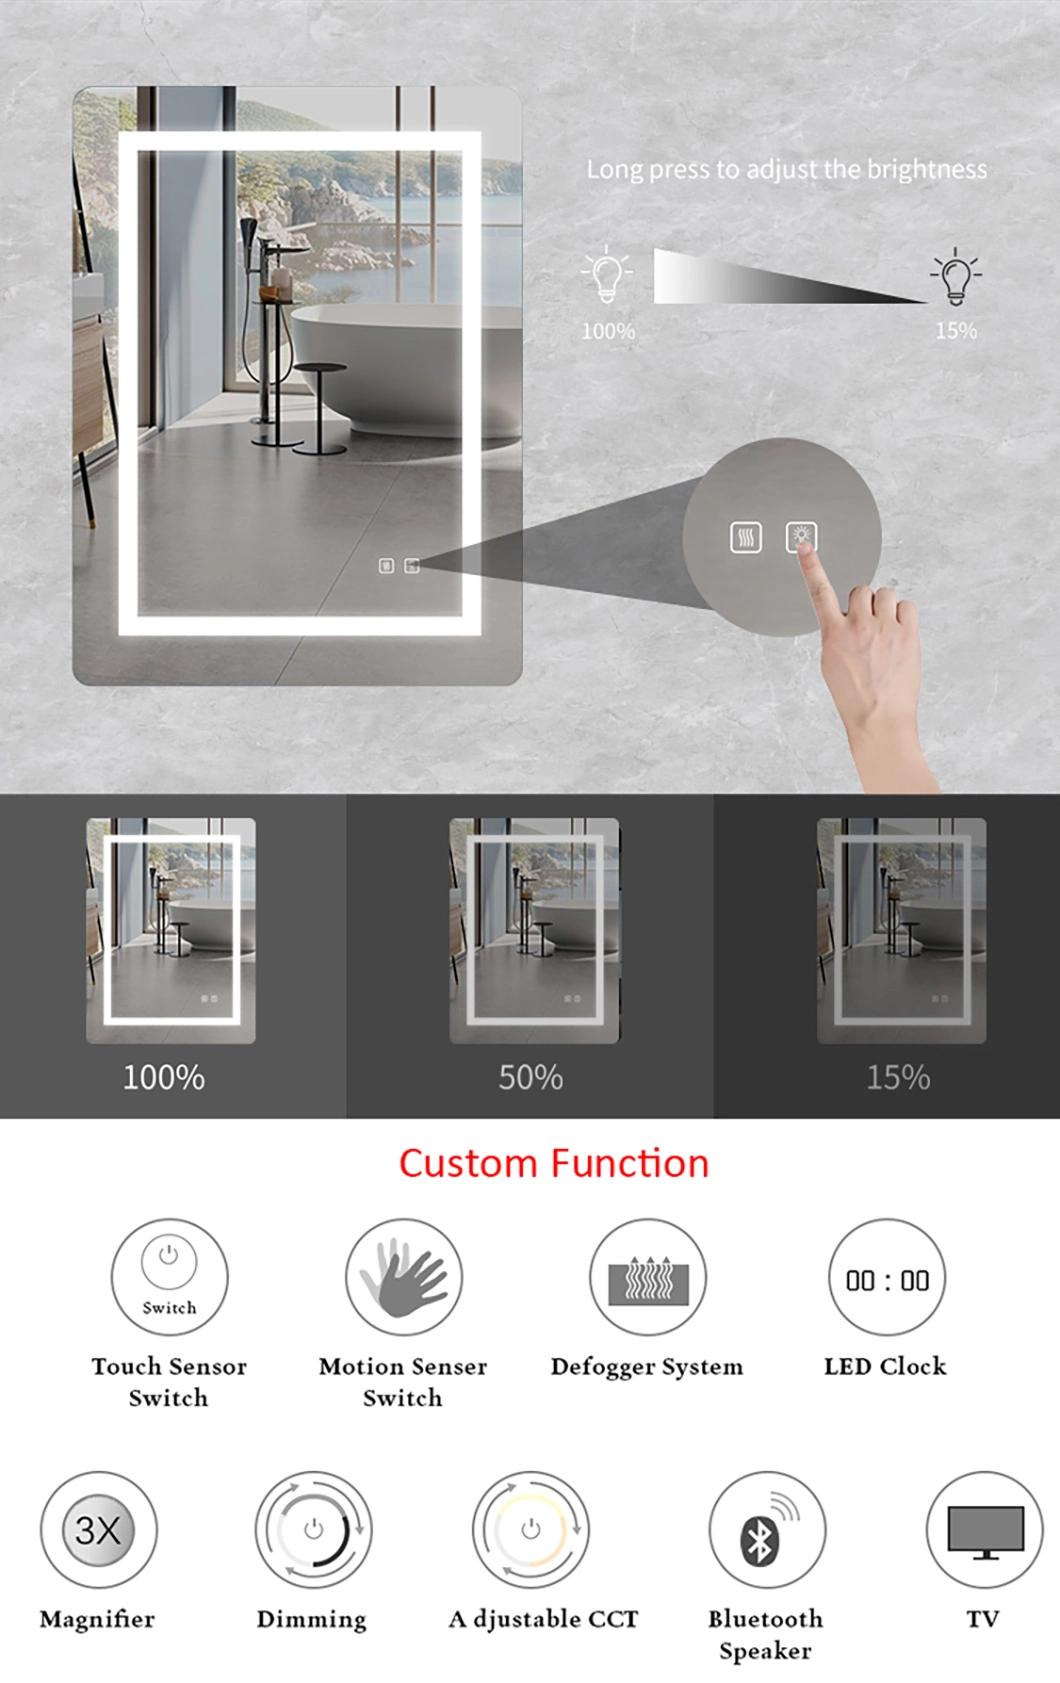 Smart Bathroom Mirror Cabinet Hotel Rectangular Wall-Mounted Touch Screen